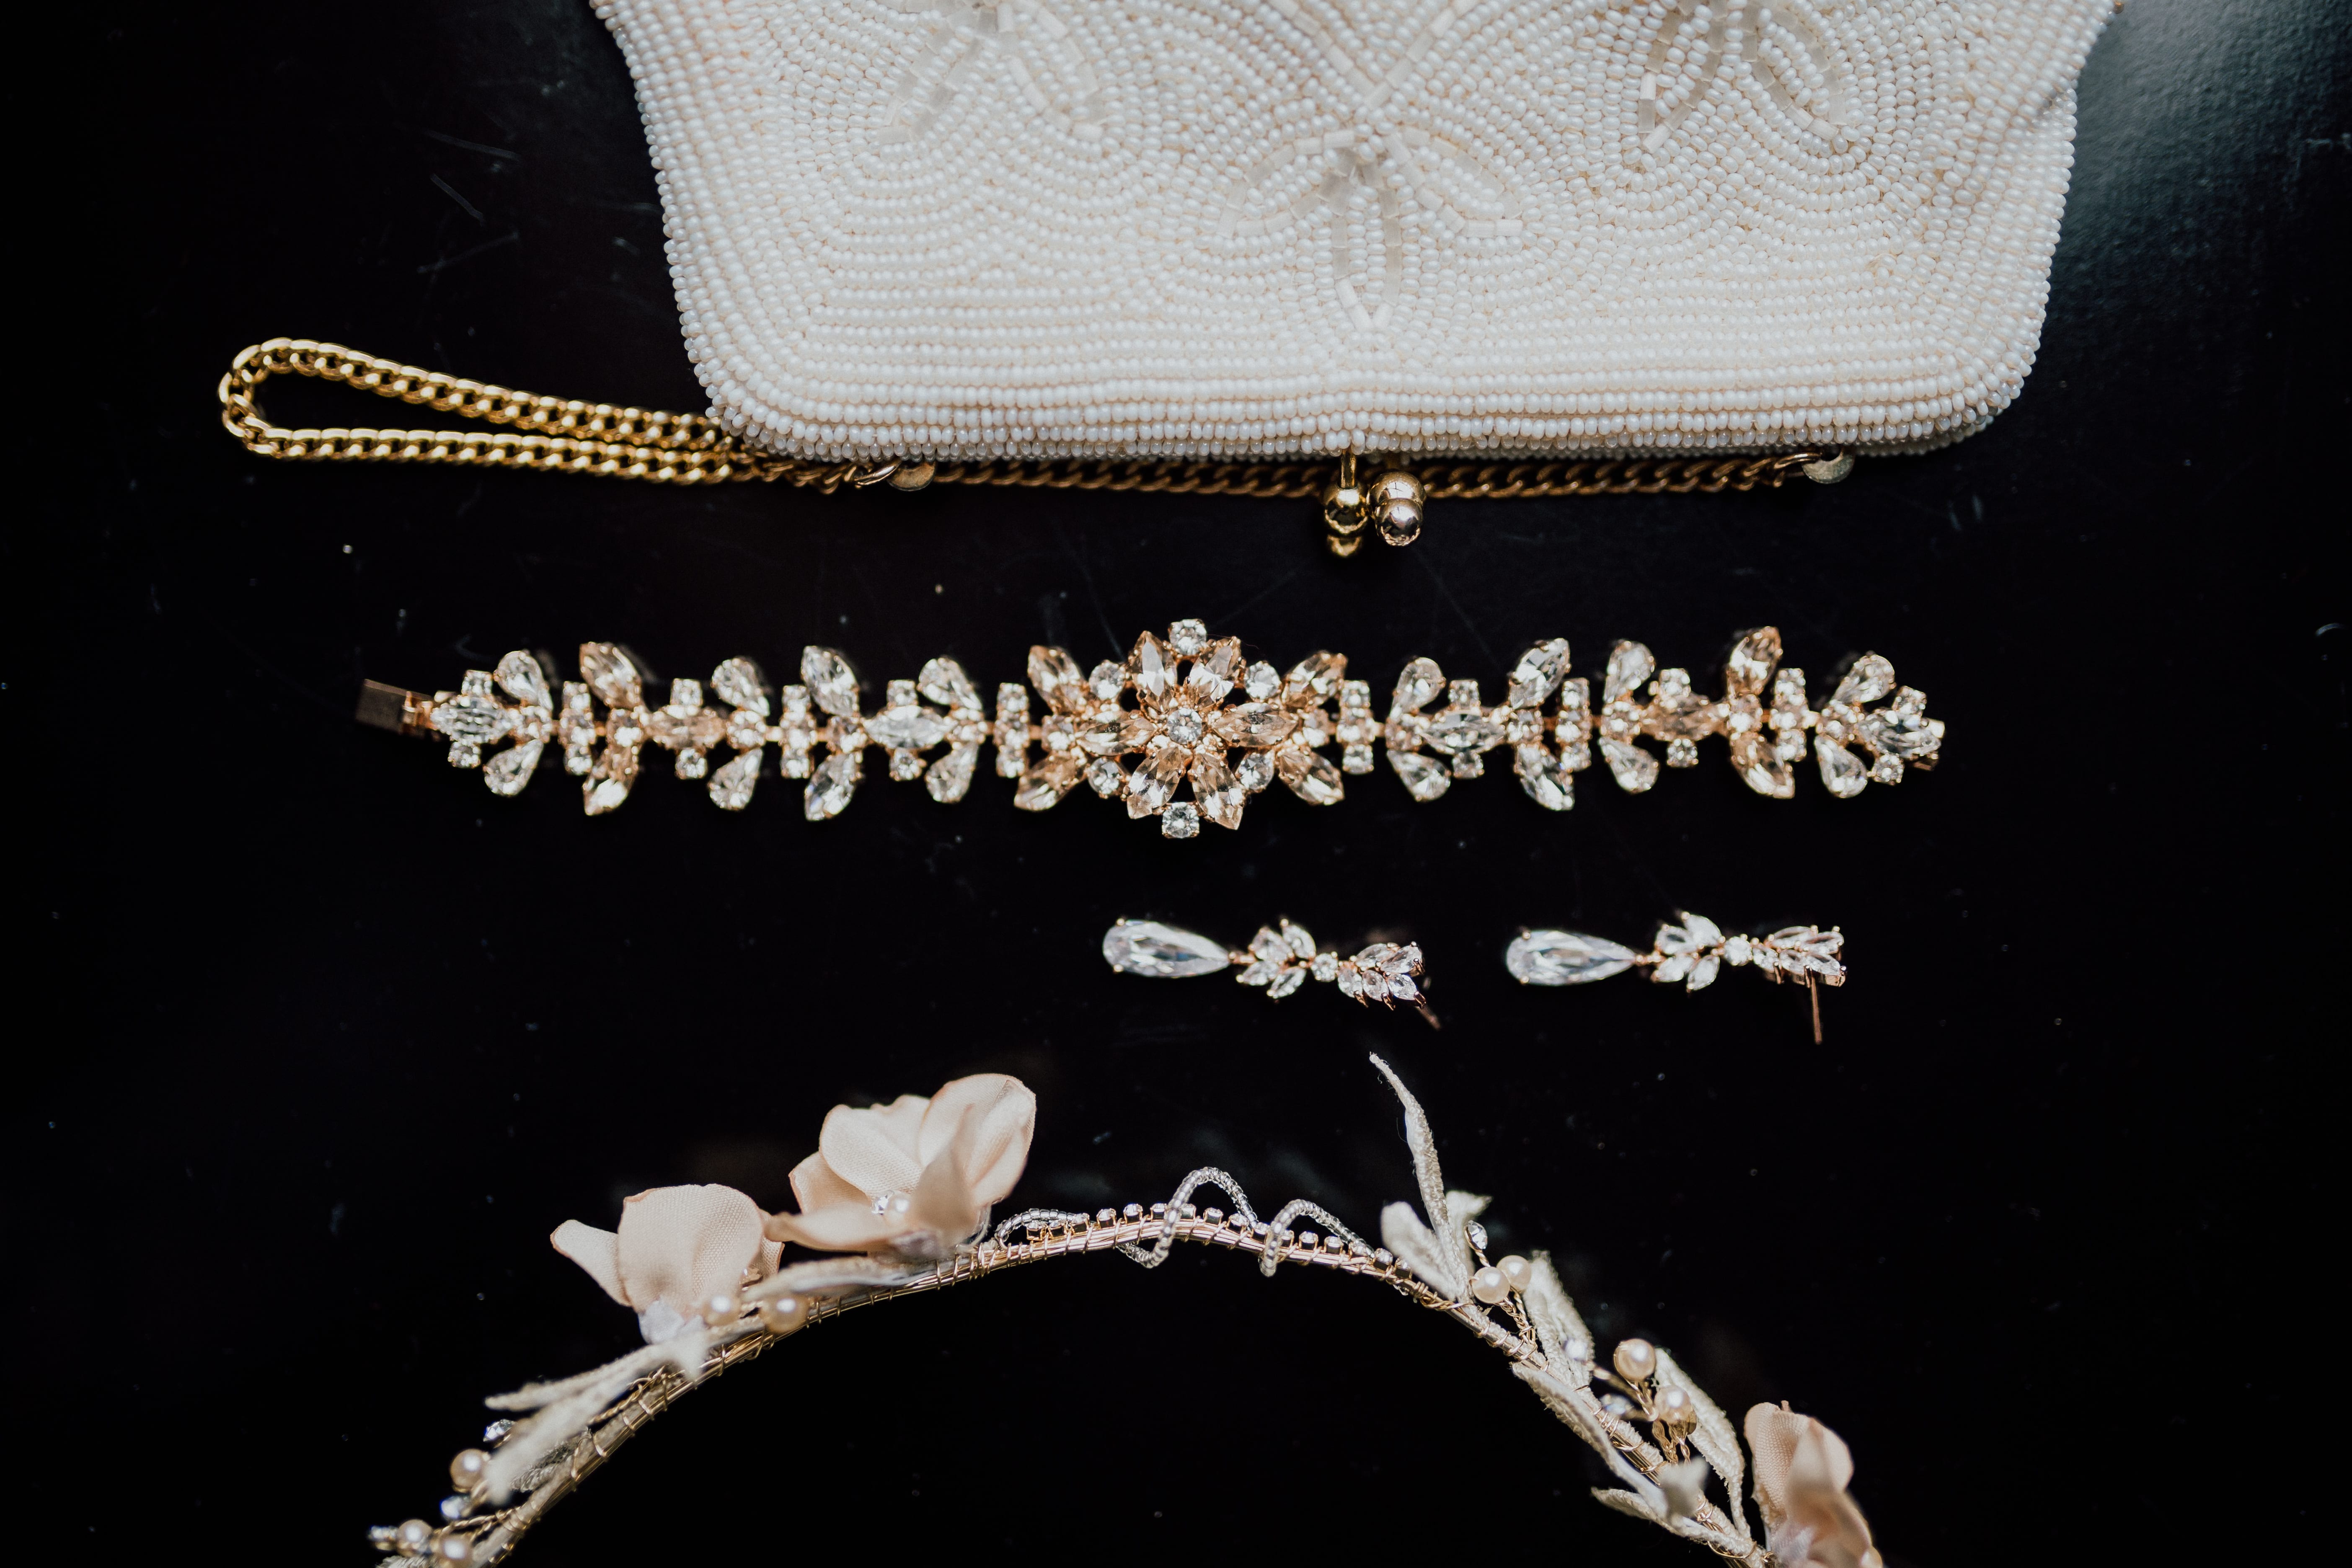 Bridal details and jewelry